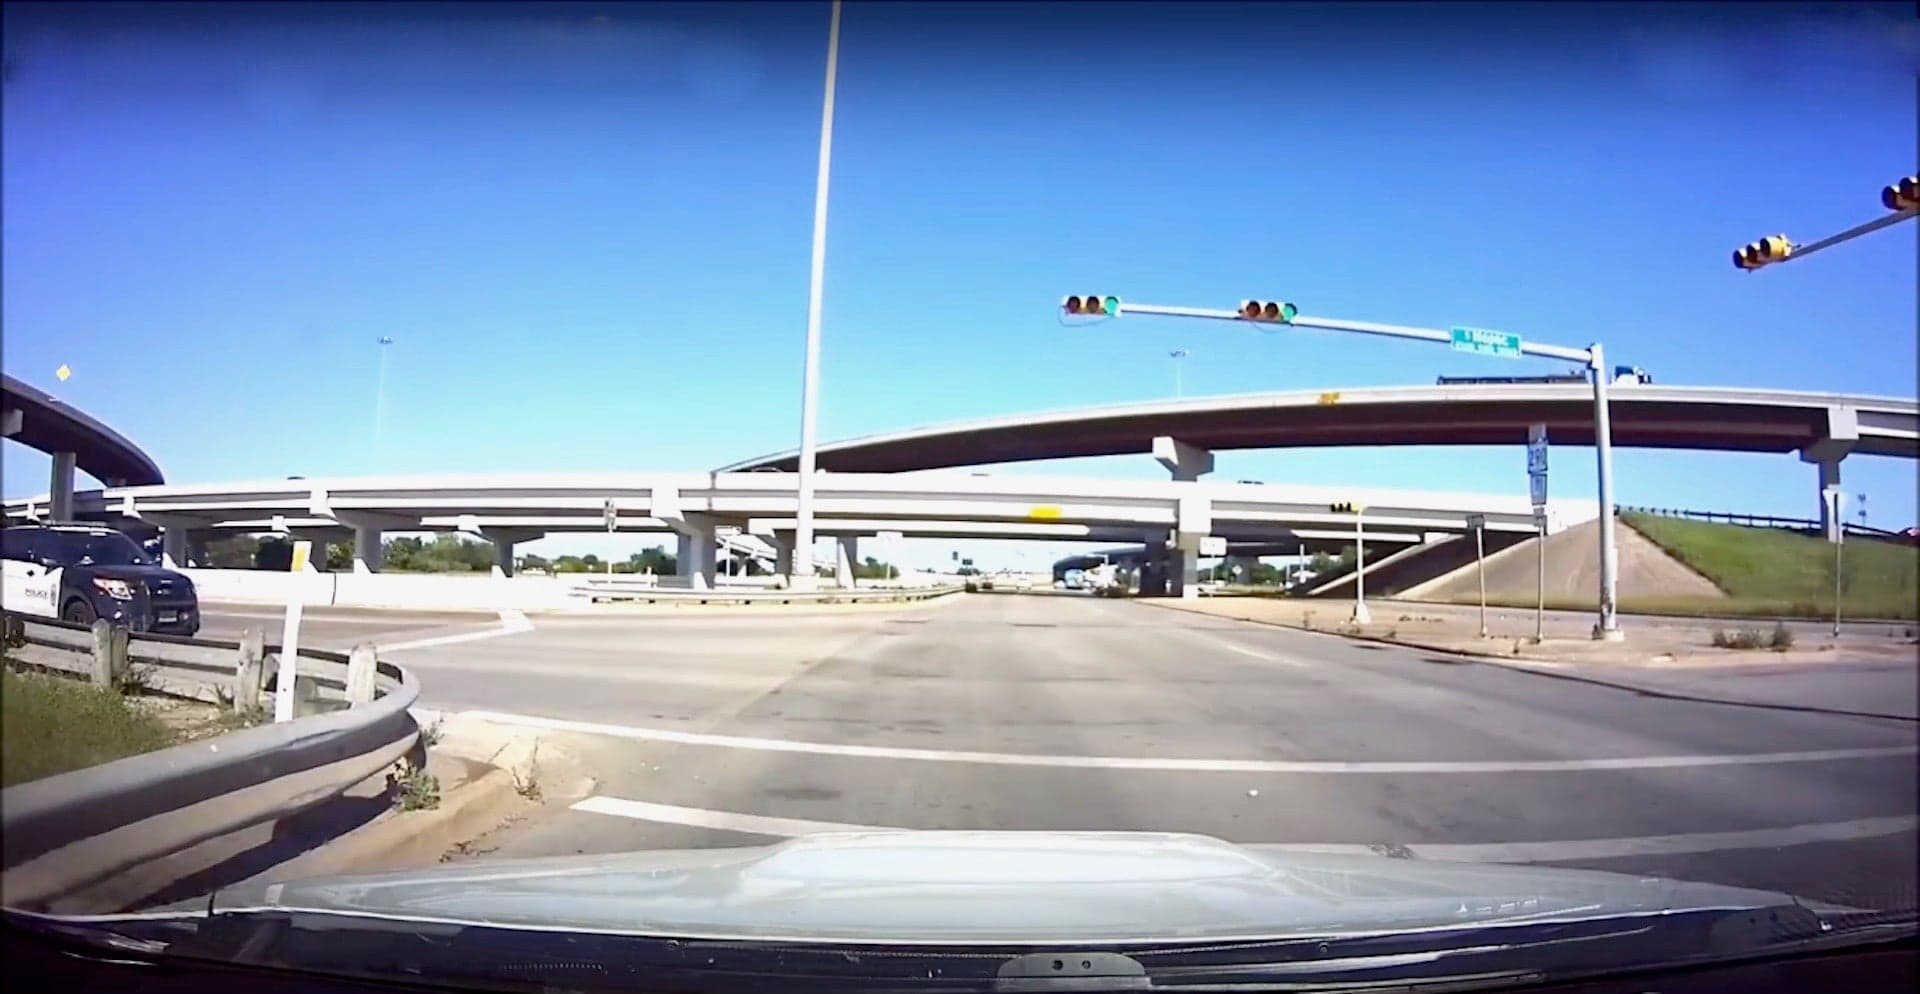 Watch a Distracted Cop Run a Red Light and Narrowly Miss a Subaru